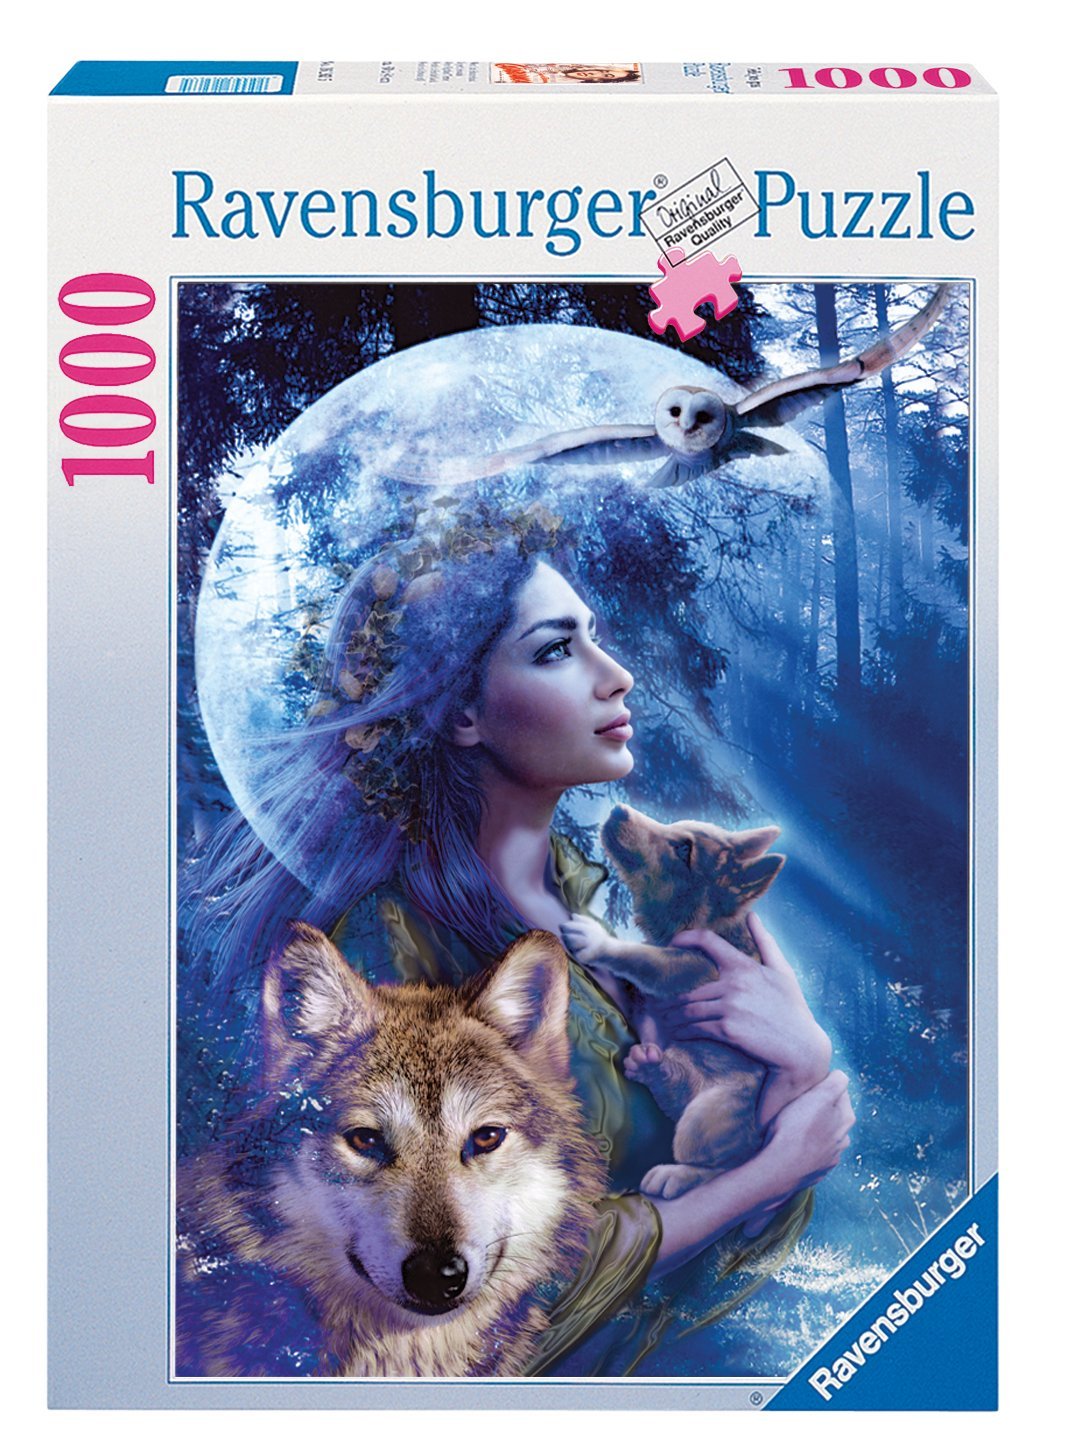 Protector of Wolfes Jigsaw Puzzles 1000 piece Brand New Ravensburger 